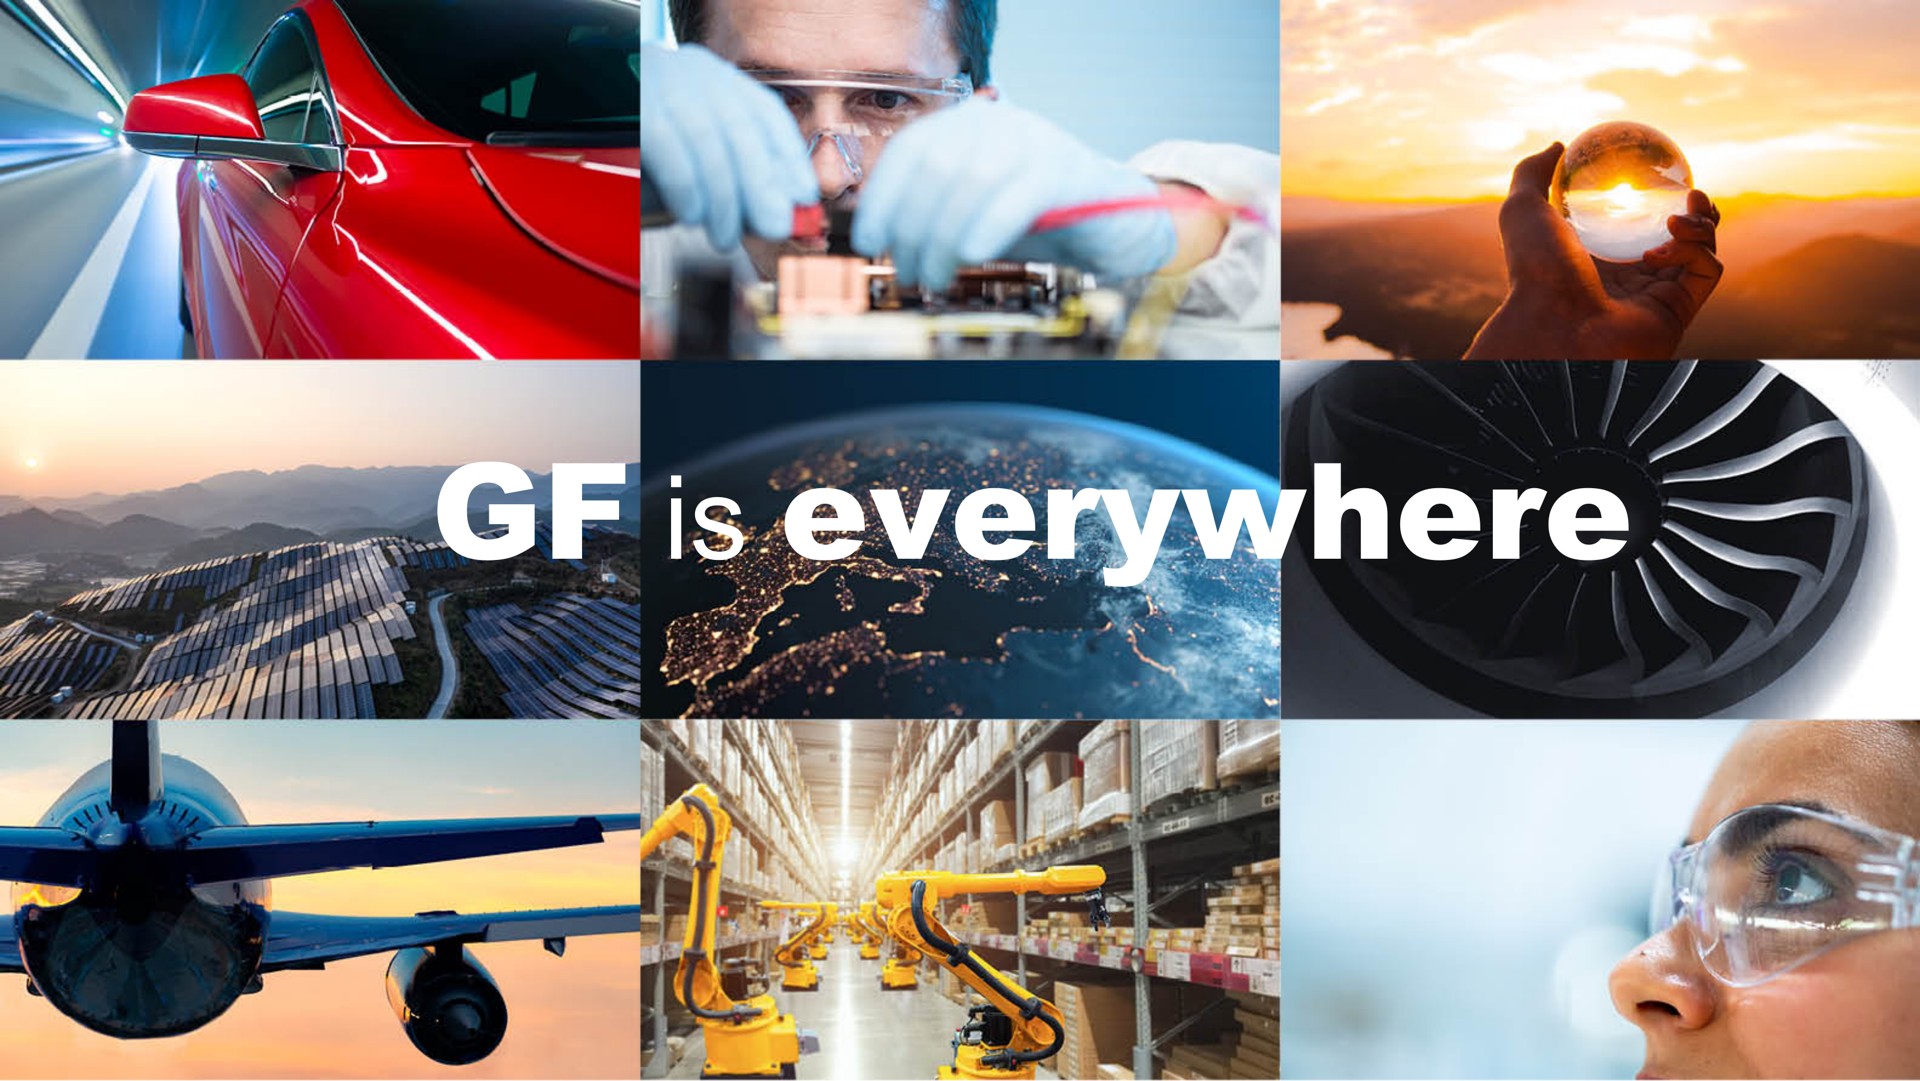 is everywhere | GlobalFoundries